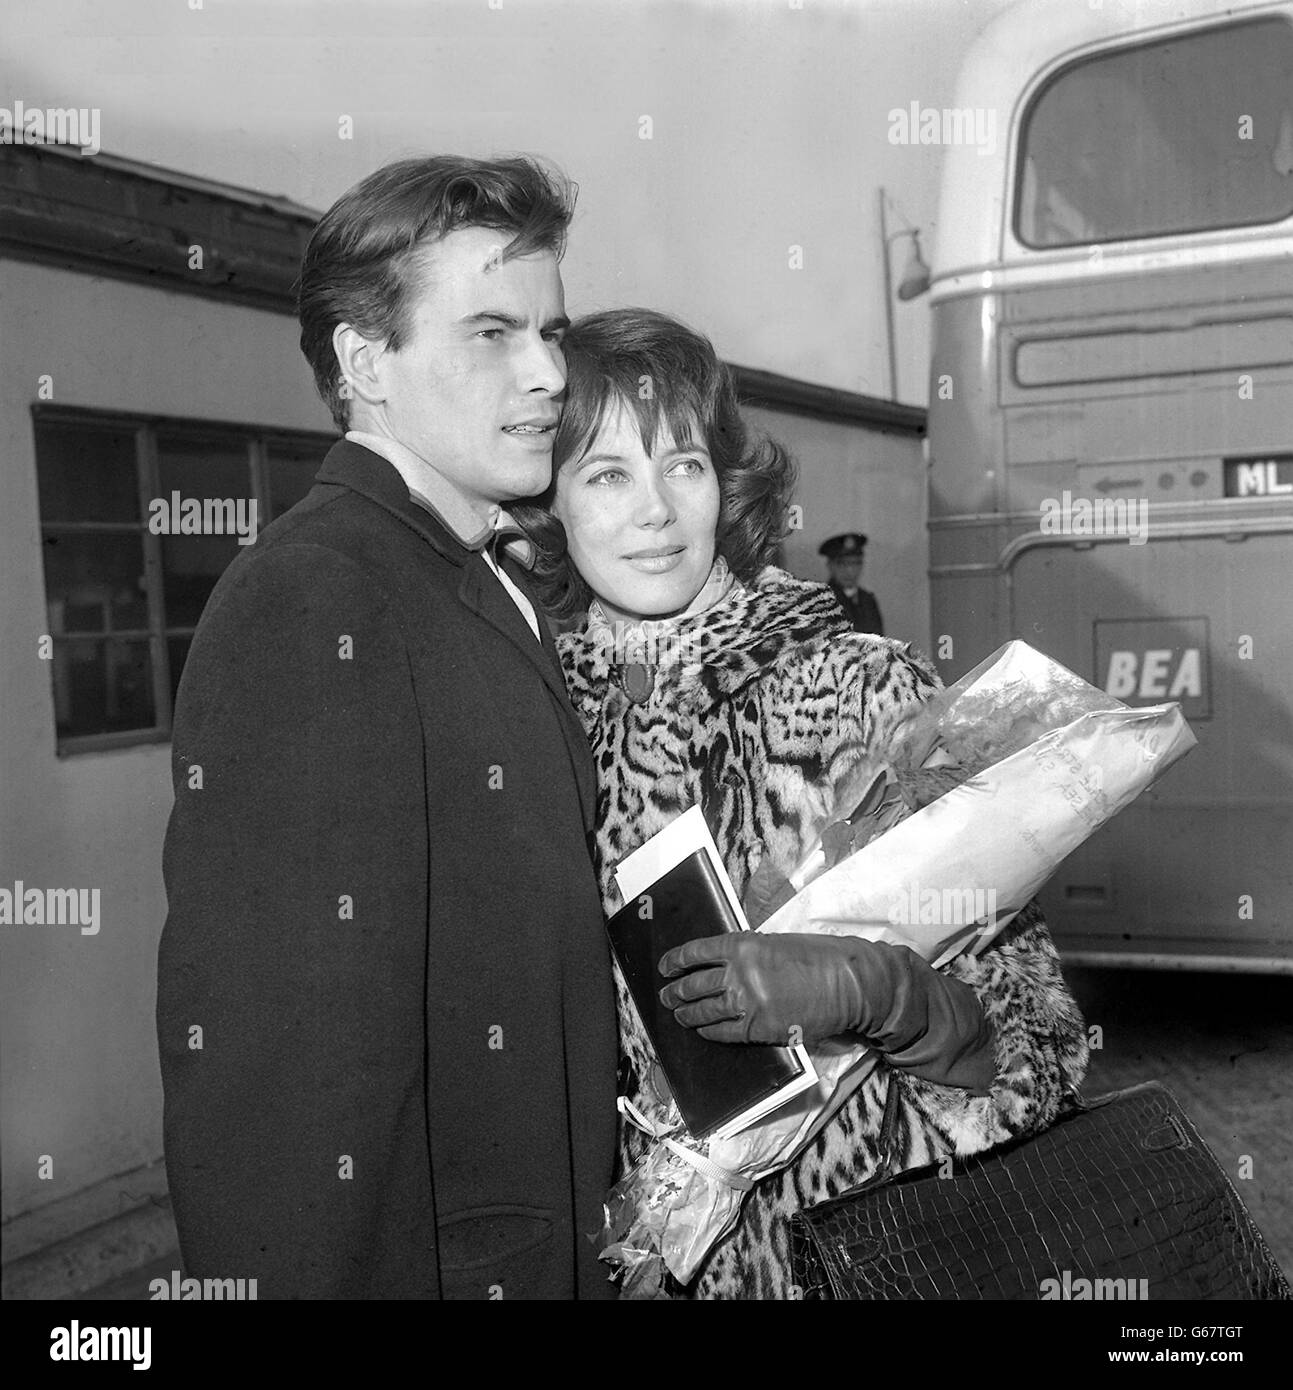 Library filer of film star Horst Buchholz with his wife, Myriam, at London Airport from New York, March 25, 1962. Buchholz, whose Hollywood credits included The Magnificent Seven died, Monday March 3, 2003, in Berlin. He was 69. Dubbed the James Dean of German films for rebellious teens he played in the late 1950s, Buchholz moved to United States and scored his first Hollywood hit with the 1960 Western The Magnificent Seven, starring with Yul Brynner, Steve McQueen, James Coburn and other action stars. See PA Story GERMANY Buchholz Stock Photo